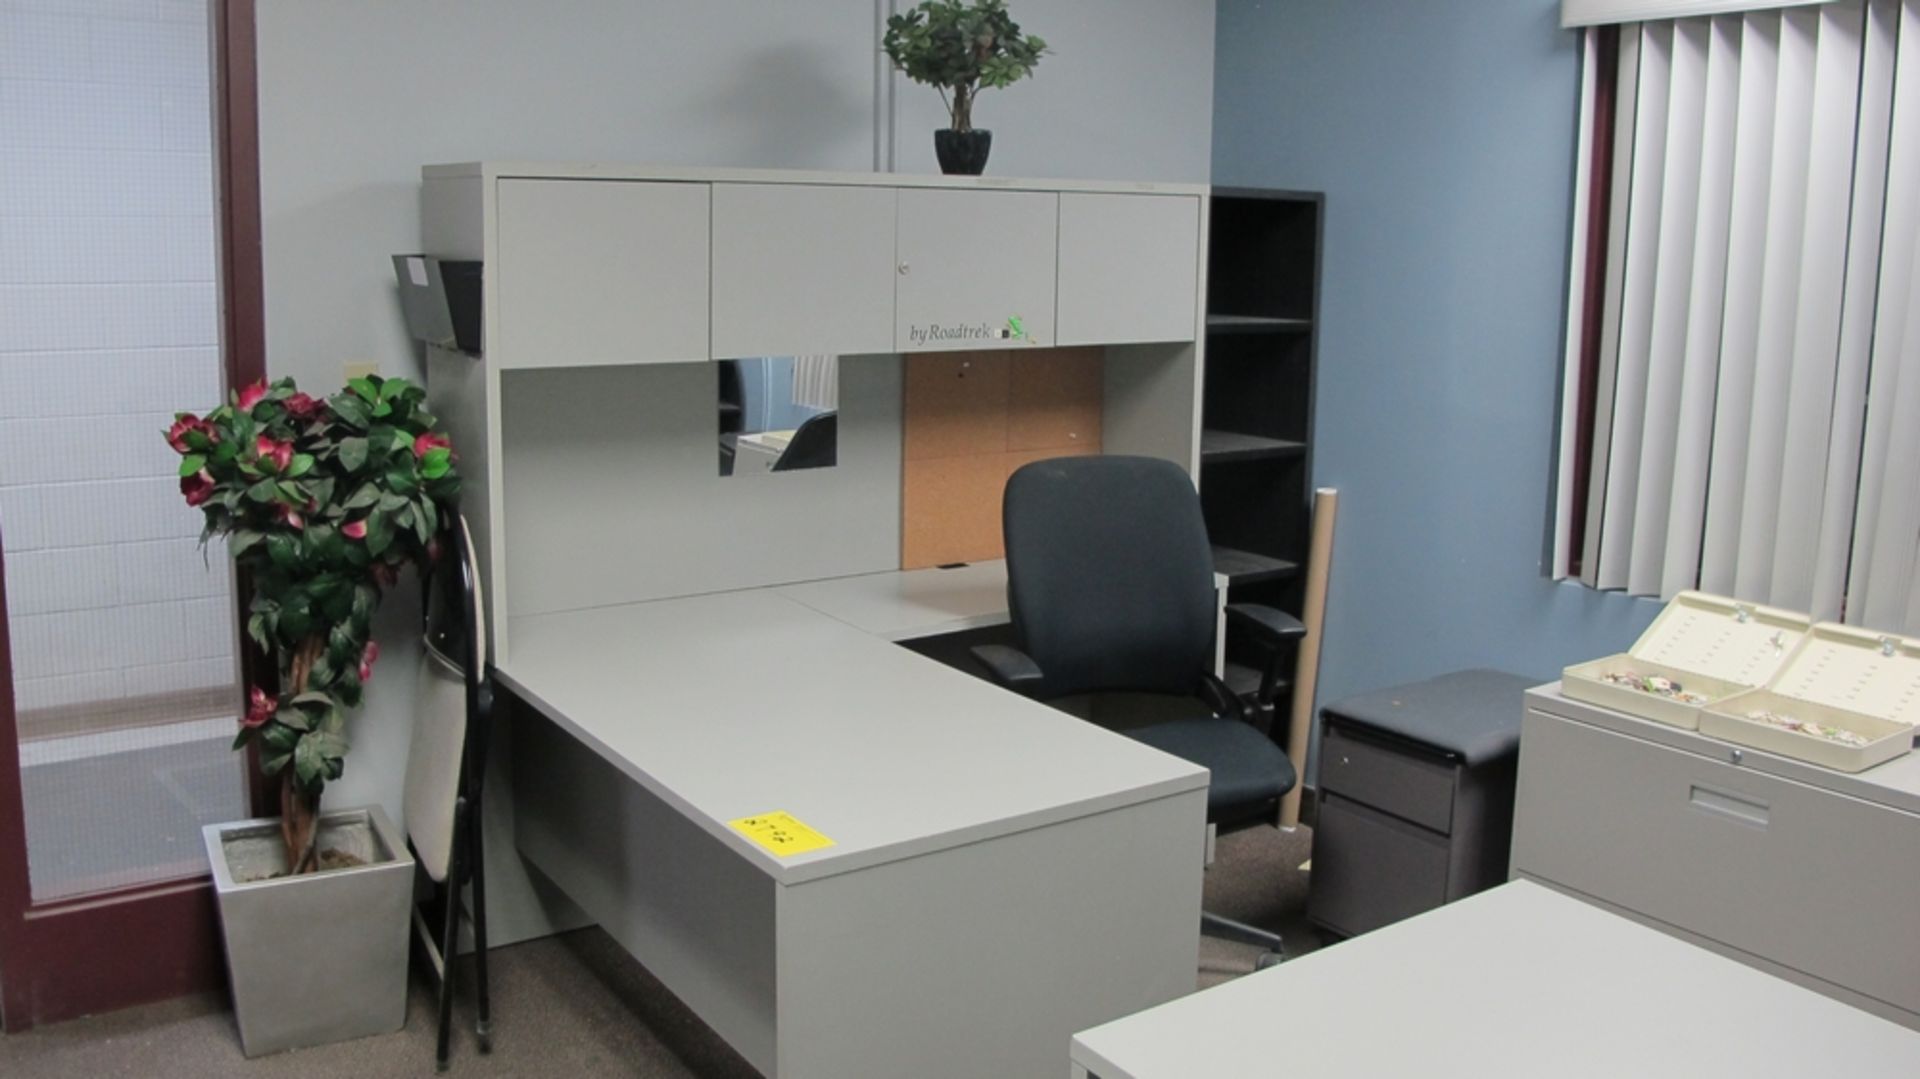 LOT OF 2 L SHAPED WORK STATIONS, 2 CHAIRS, FOLDING TABLE, 2 FILE CABINETS, BOOKCASE AND ARTIFICIAL - Image 2 of 3